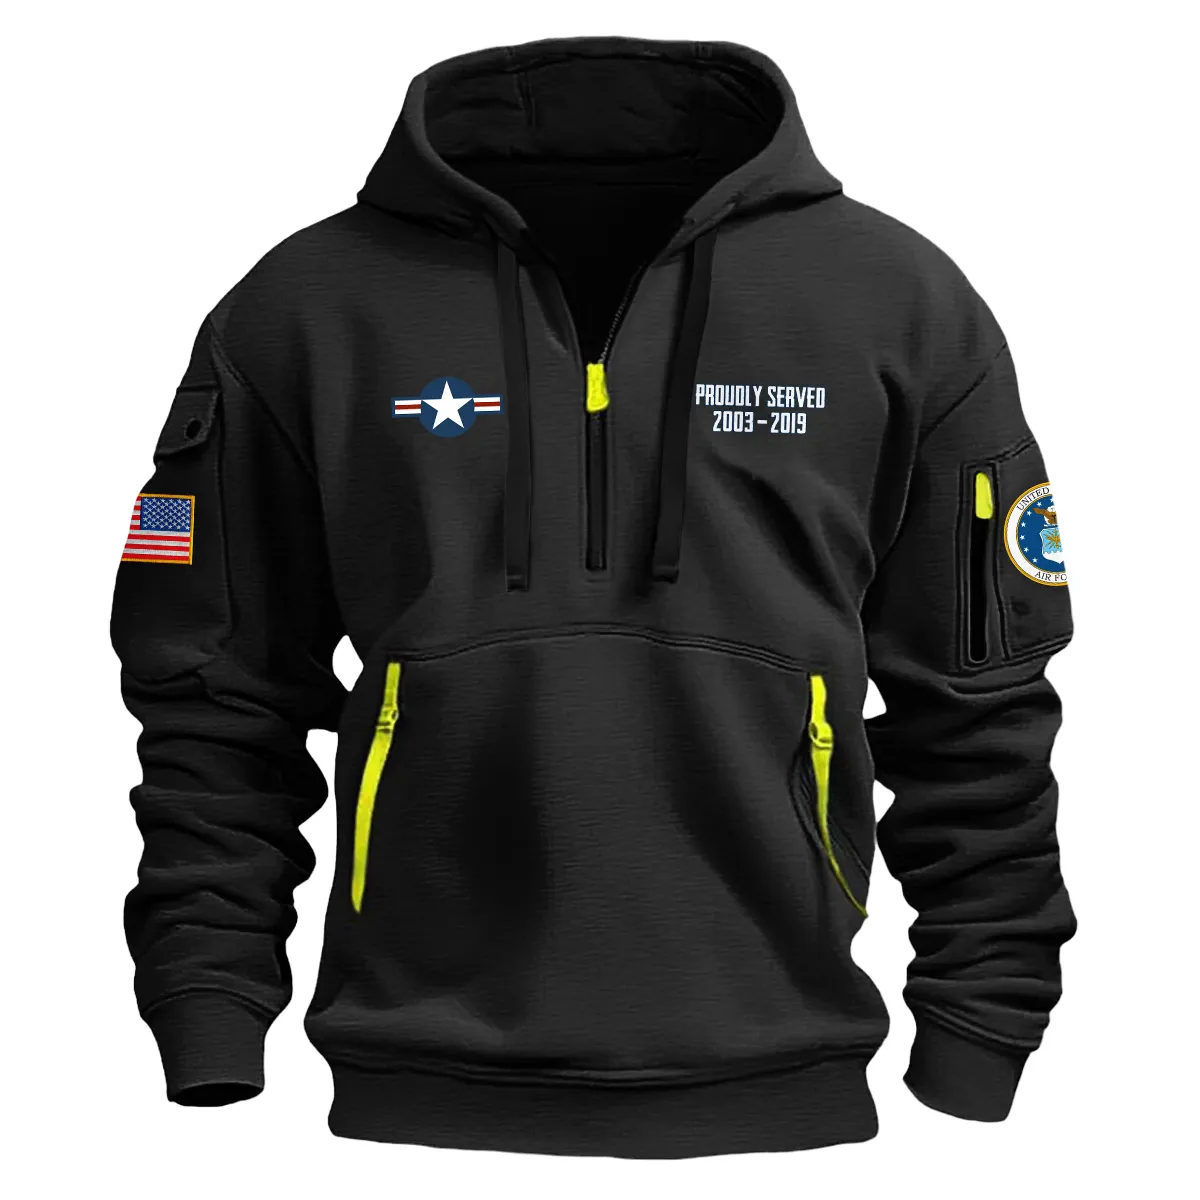 US Military All Branches! Personalized Gift E4-SRA U.S. Air Force Fashion Hoodie Half Zipper